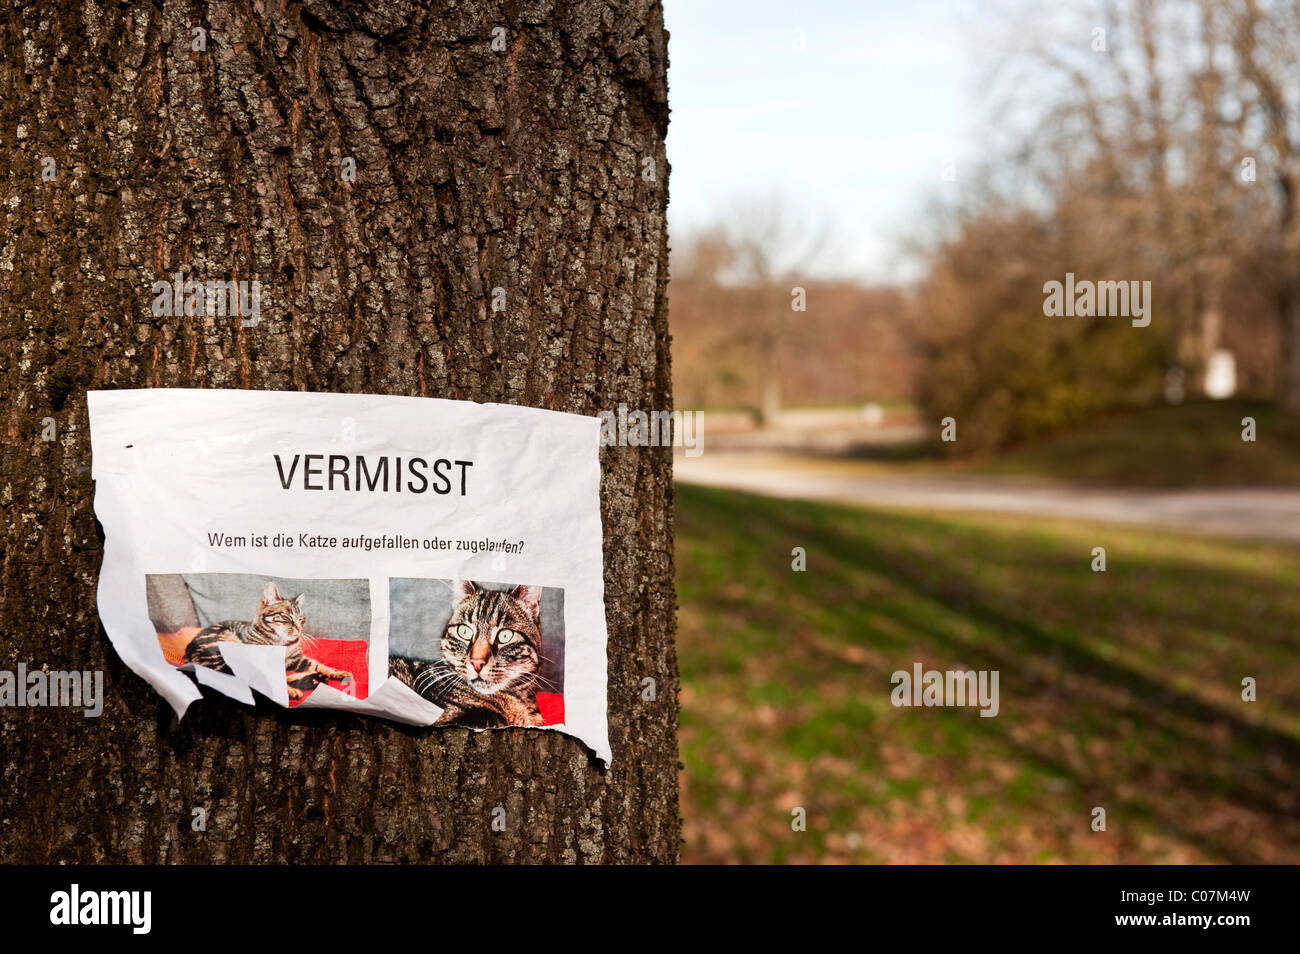 Piece of paper attached to a tree, cat missing, in German language Stock Photo